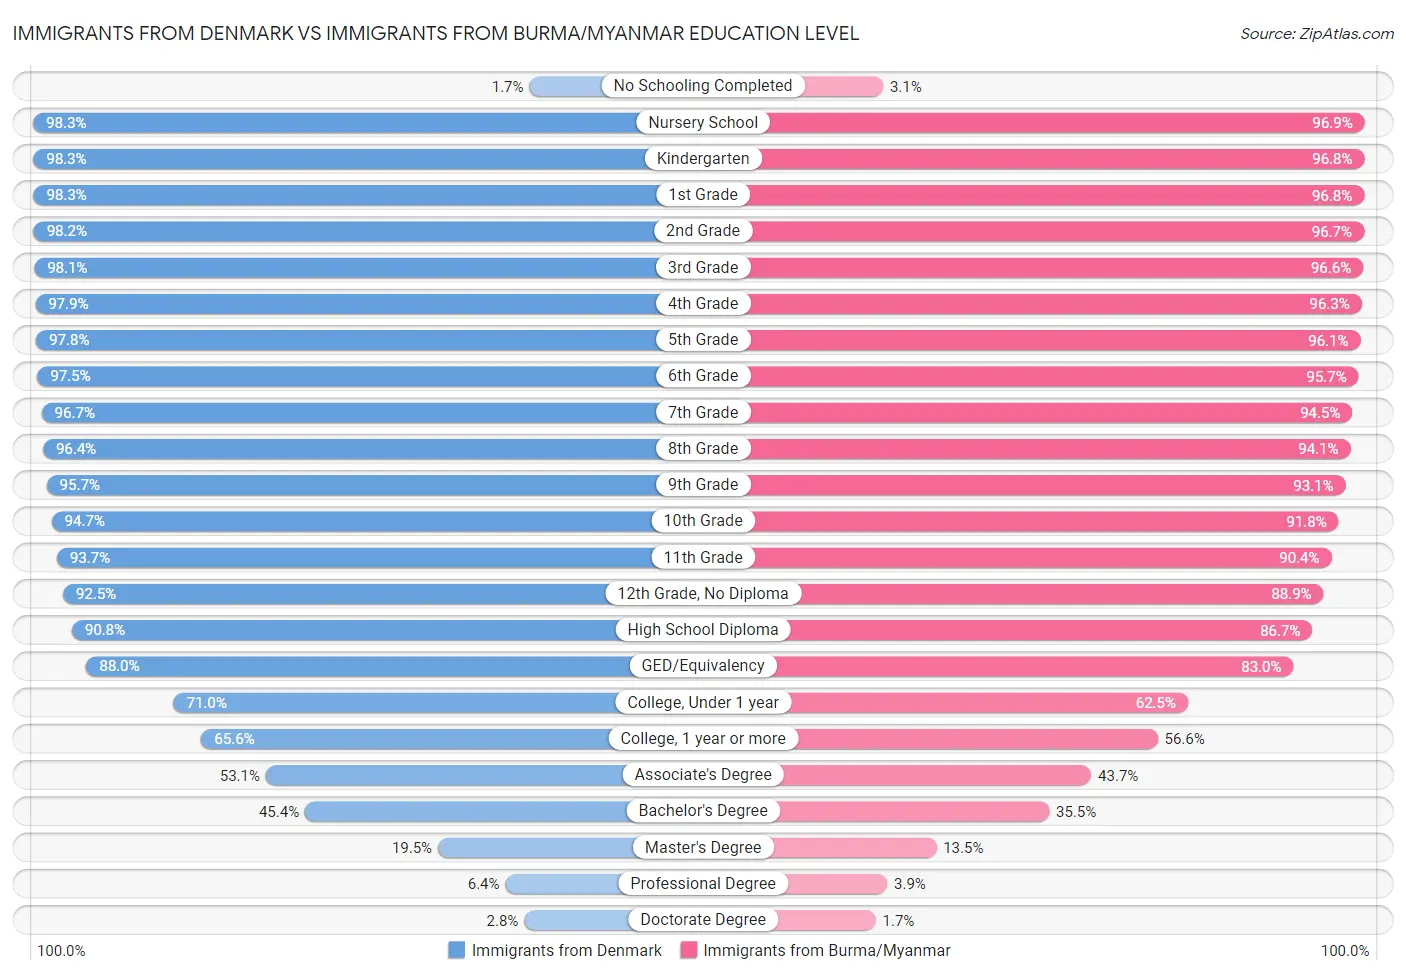 Immigrants from Denmark vs Immigrants from Burma/Myanmar Education Level